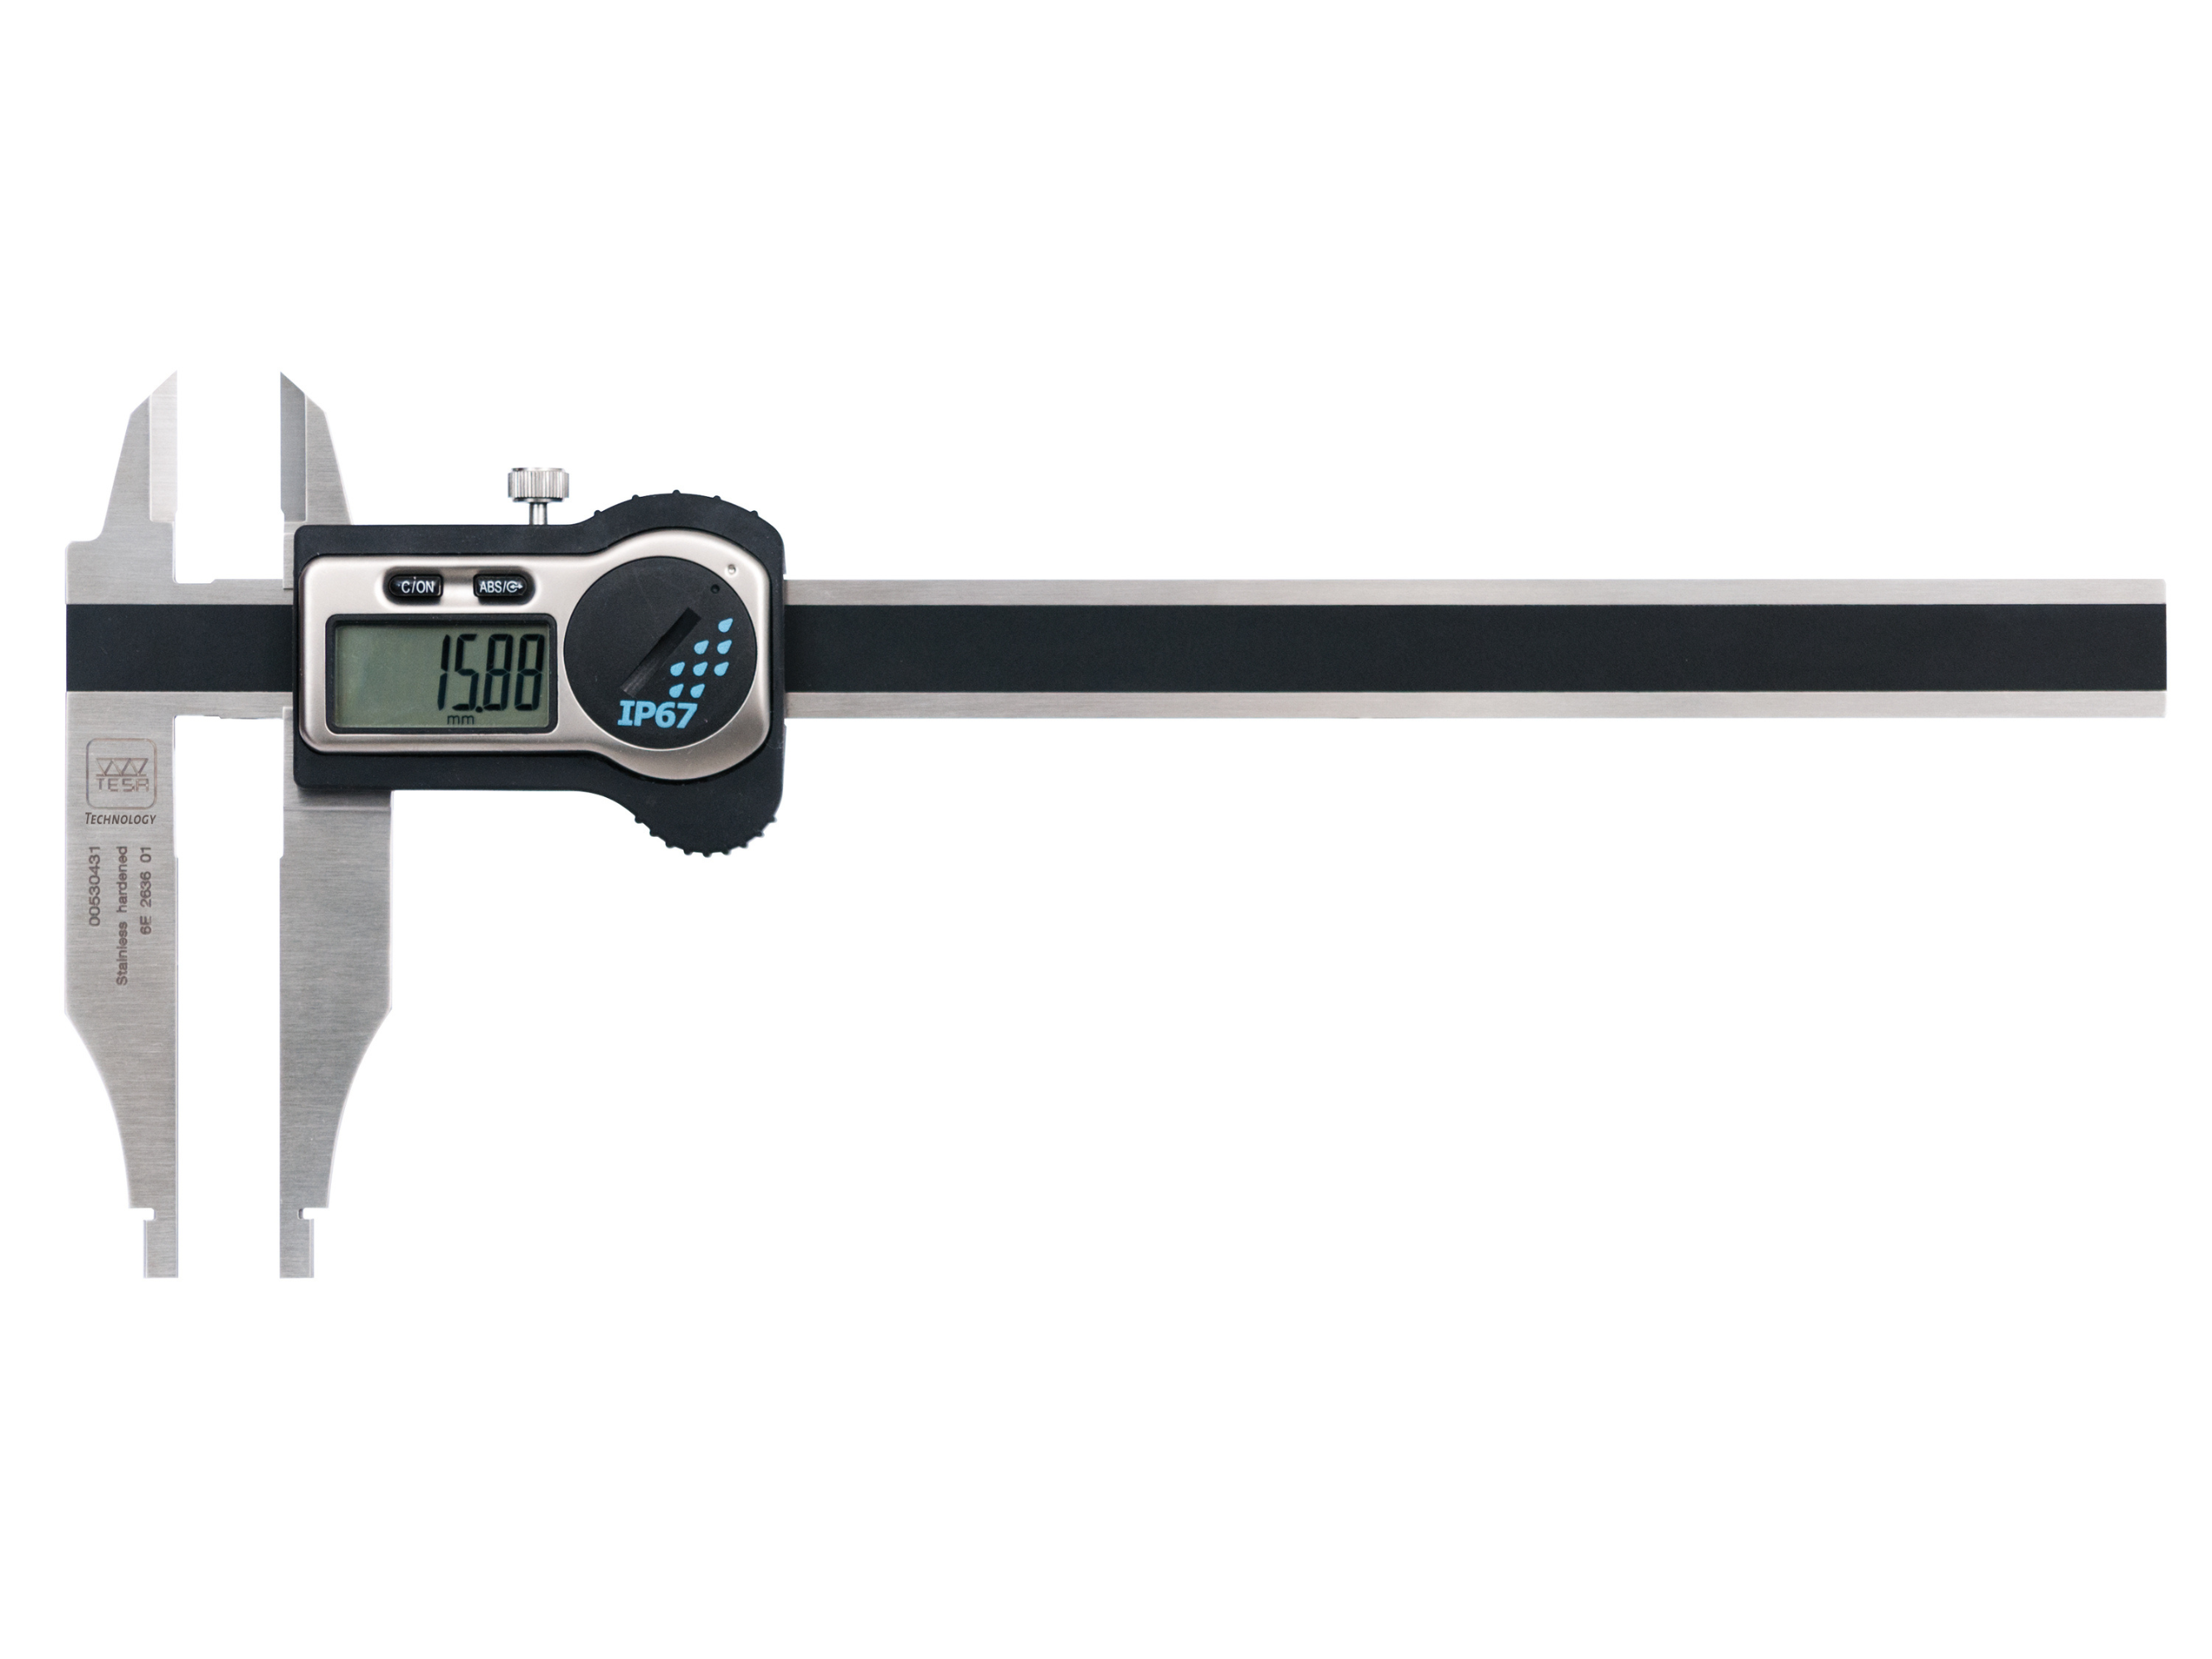 Tesa Digital workshop caliper, with rounded internal measuring faces & knife-edge external jaws, 1000 mm 00530437 